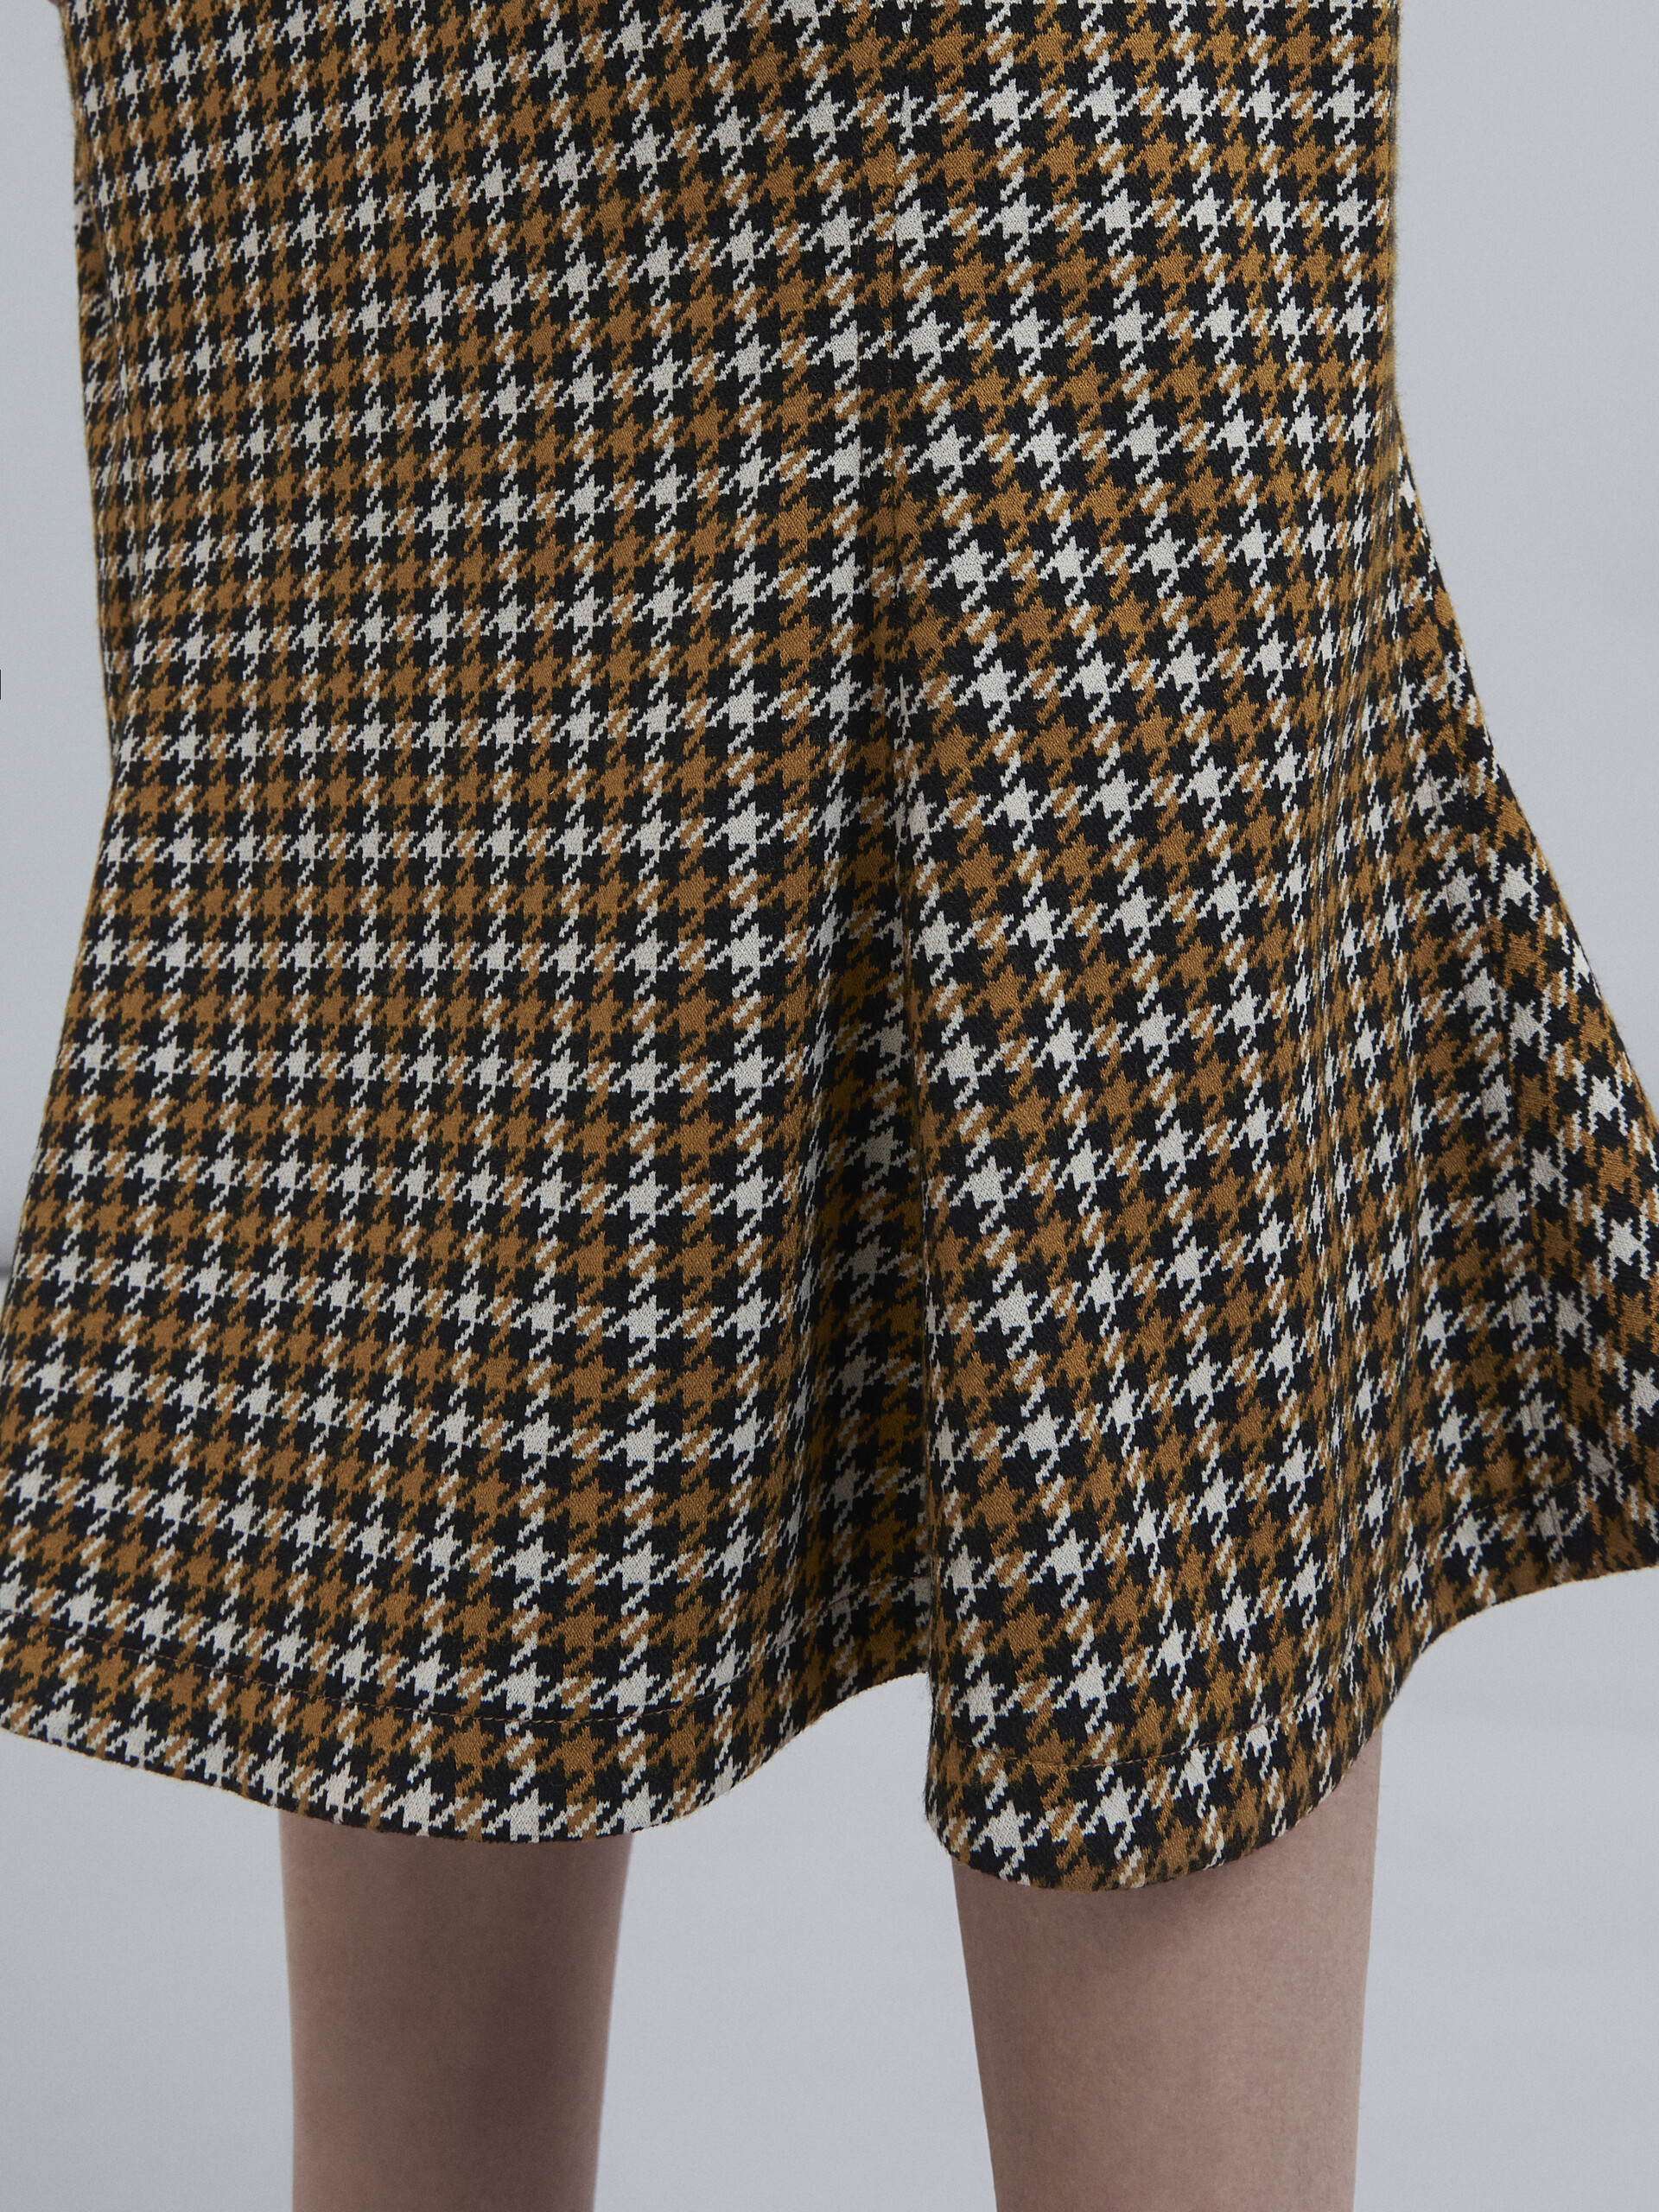 Wool jersey and cashmere godet skirt - Skirts - Image 4